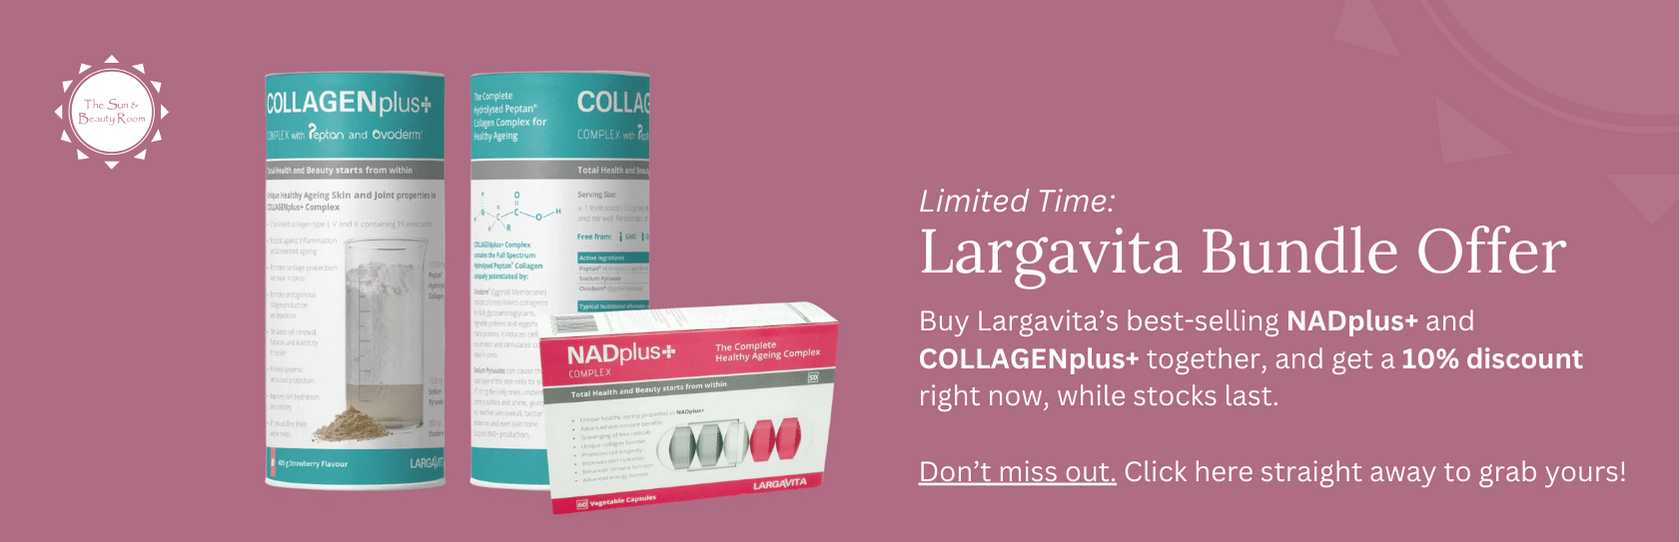 Largavita COLLAGENplus+ and NADplus+ products. Special offer. 10% off when you buy both together.